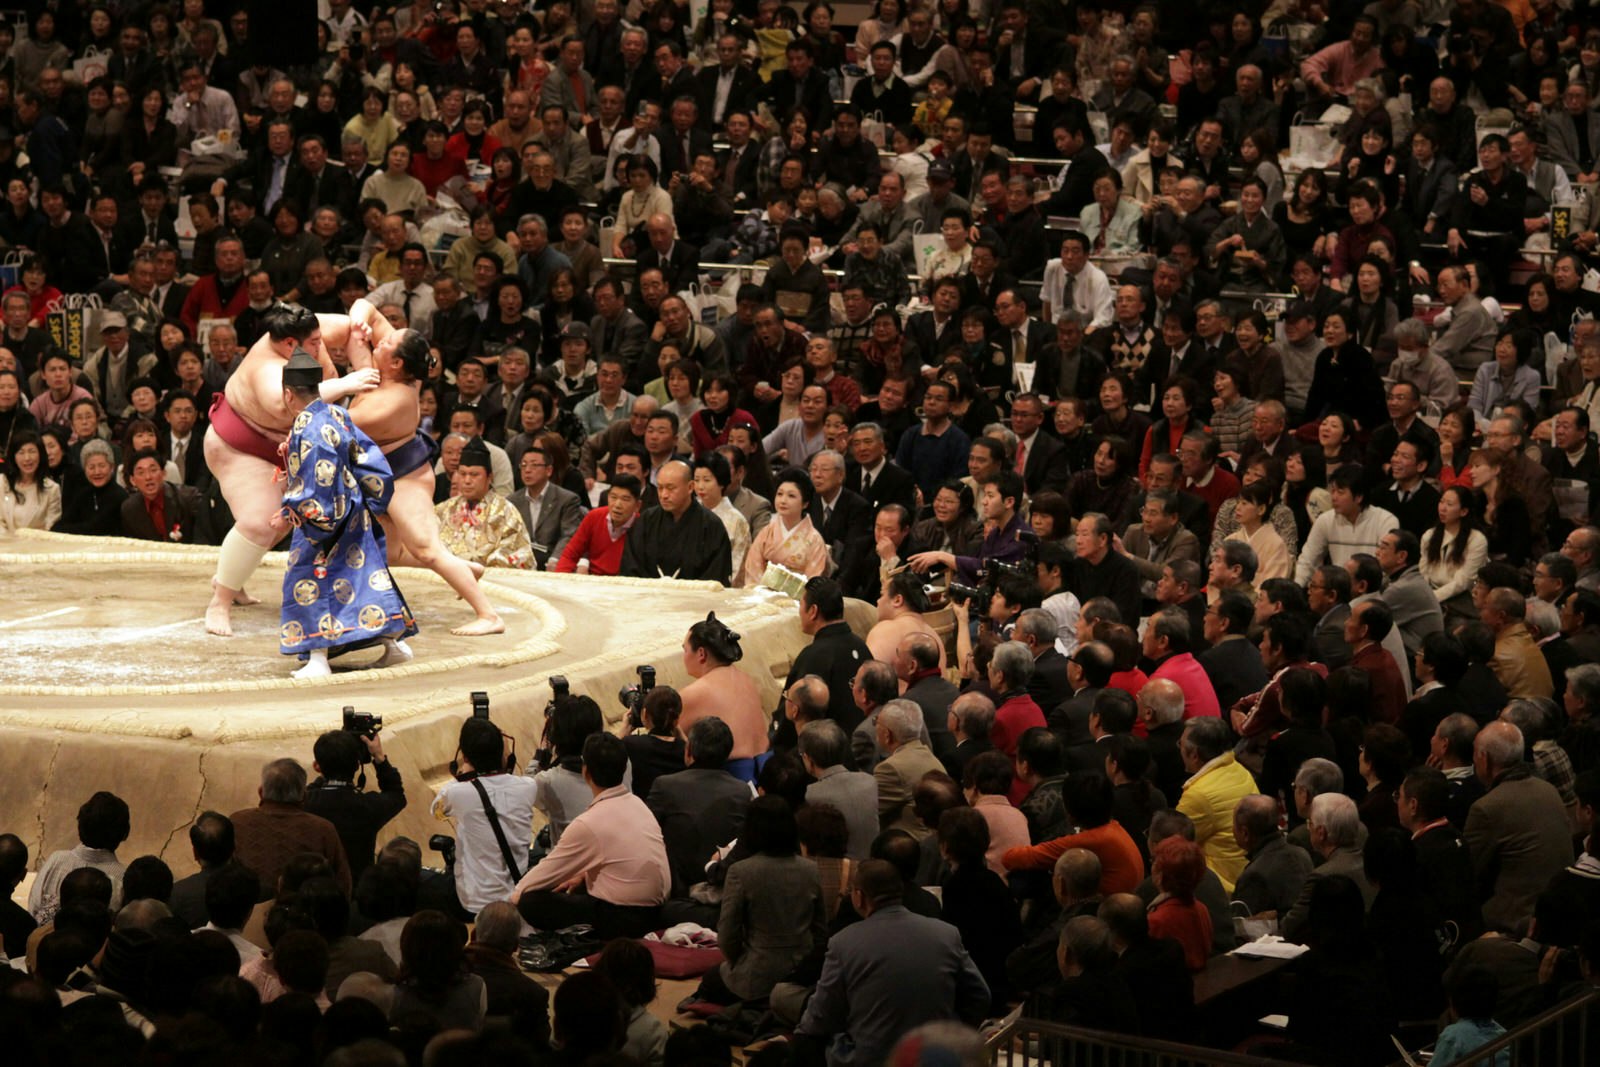 View of the large crowd around the ring as two wrestlers fight